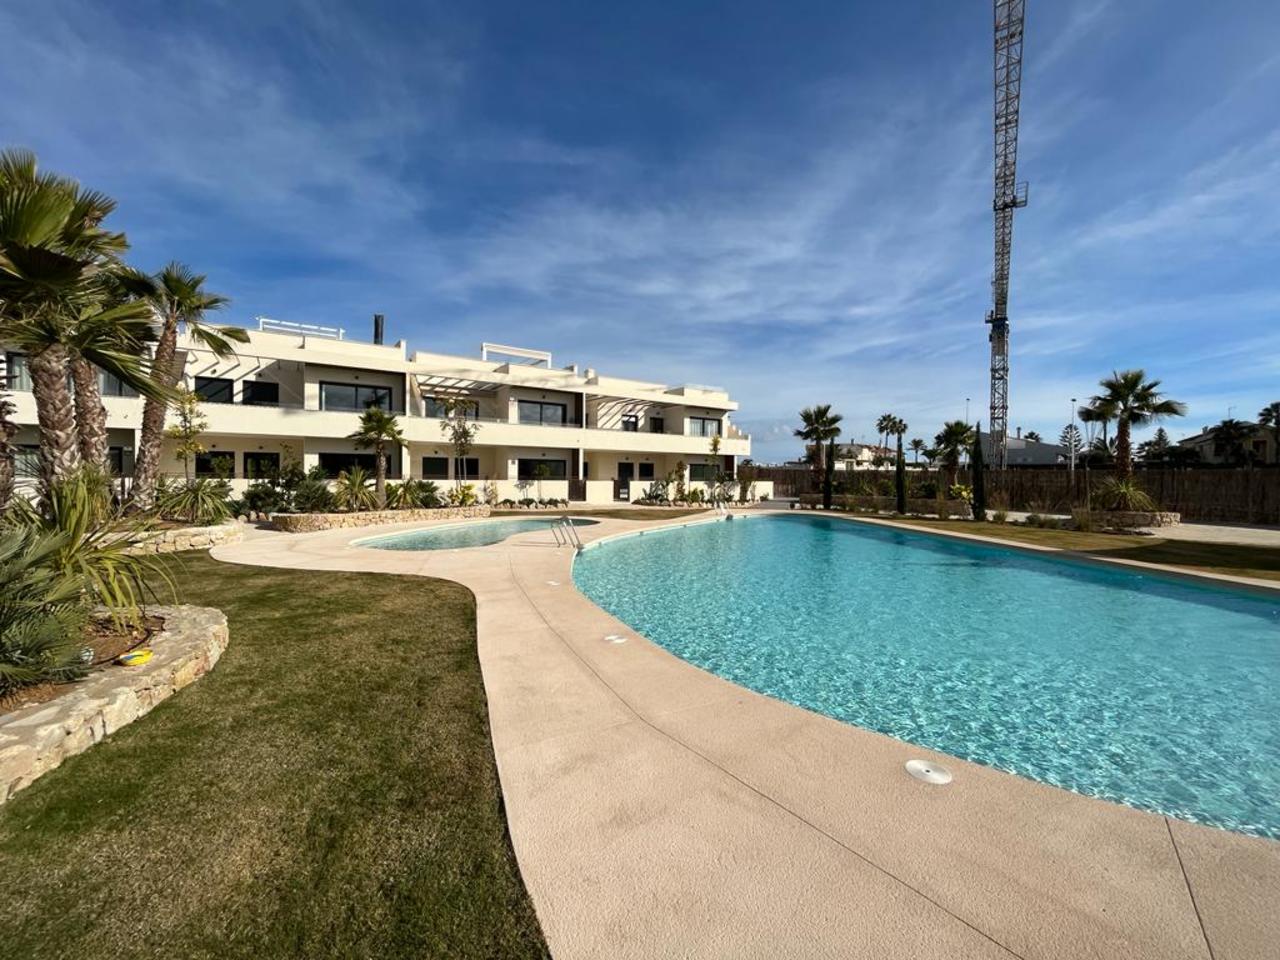 Property Image 545111-torrevieja-apartment-2-2